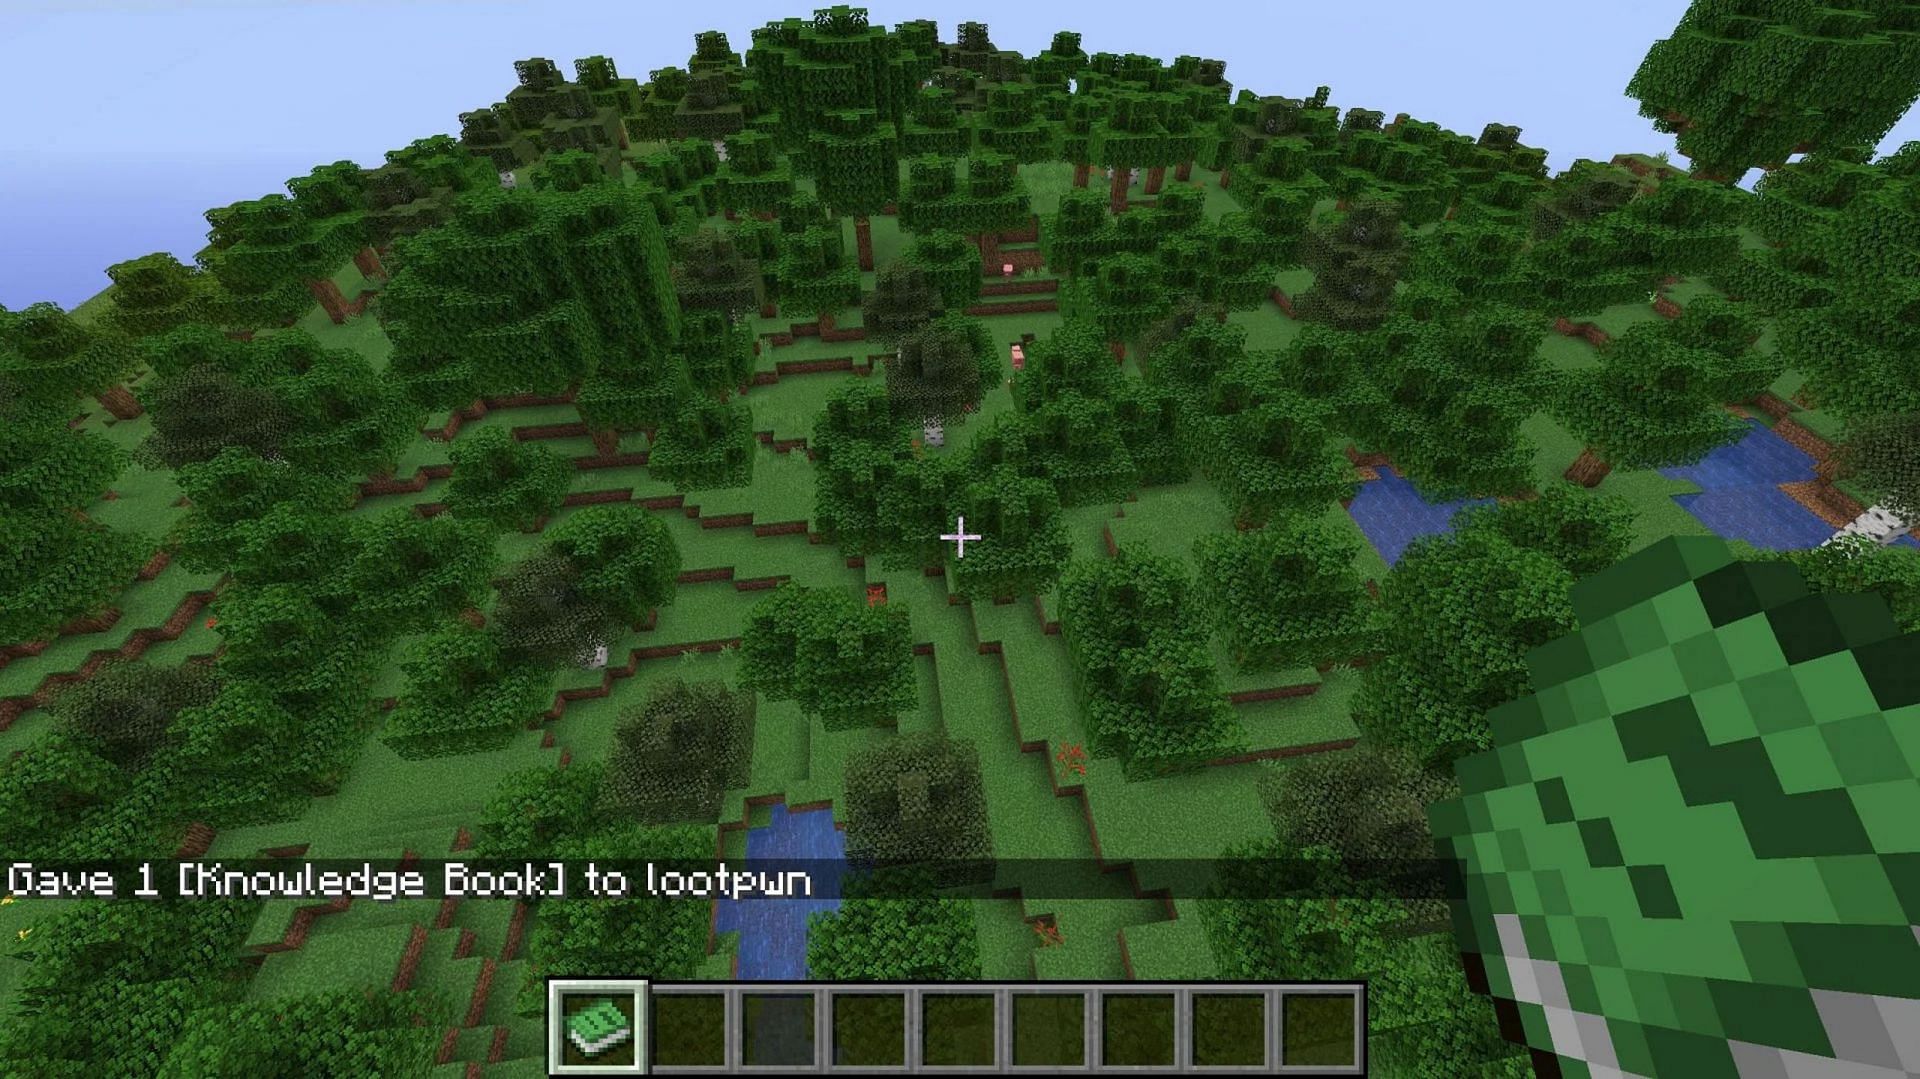 Knowledge books are exclusive to Java Edition and are obtained through commands (Image via Mojang)